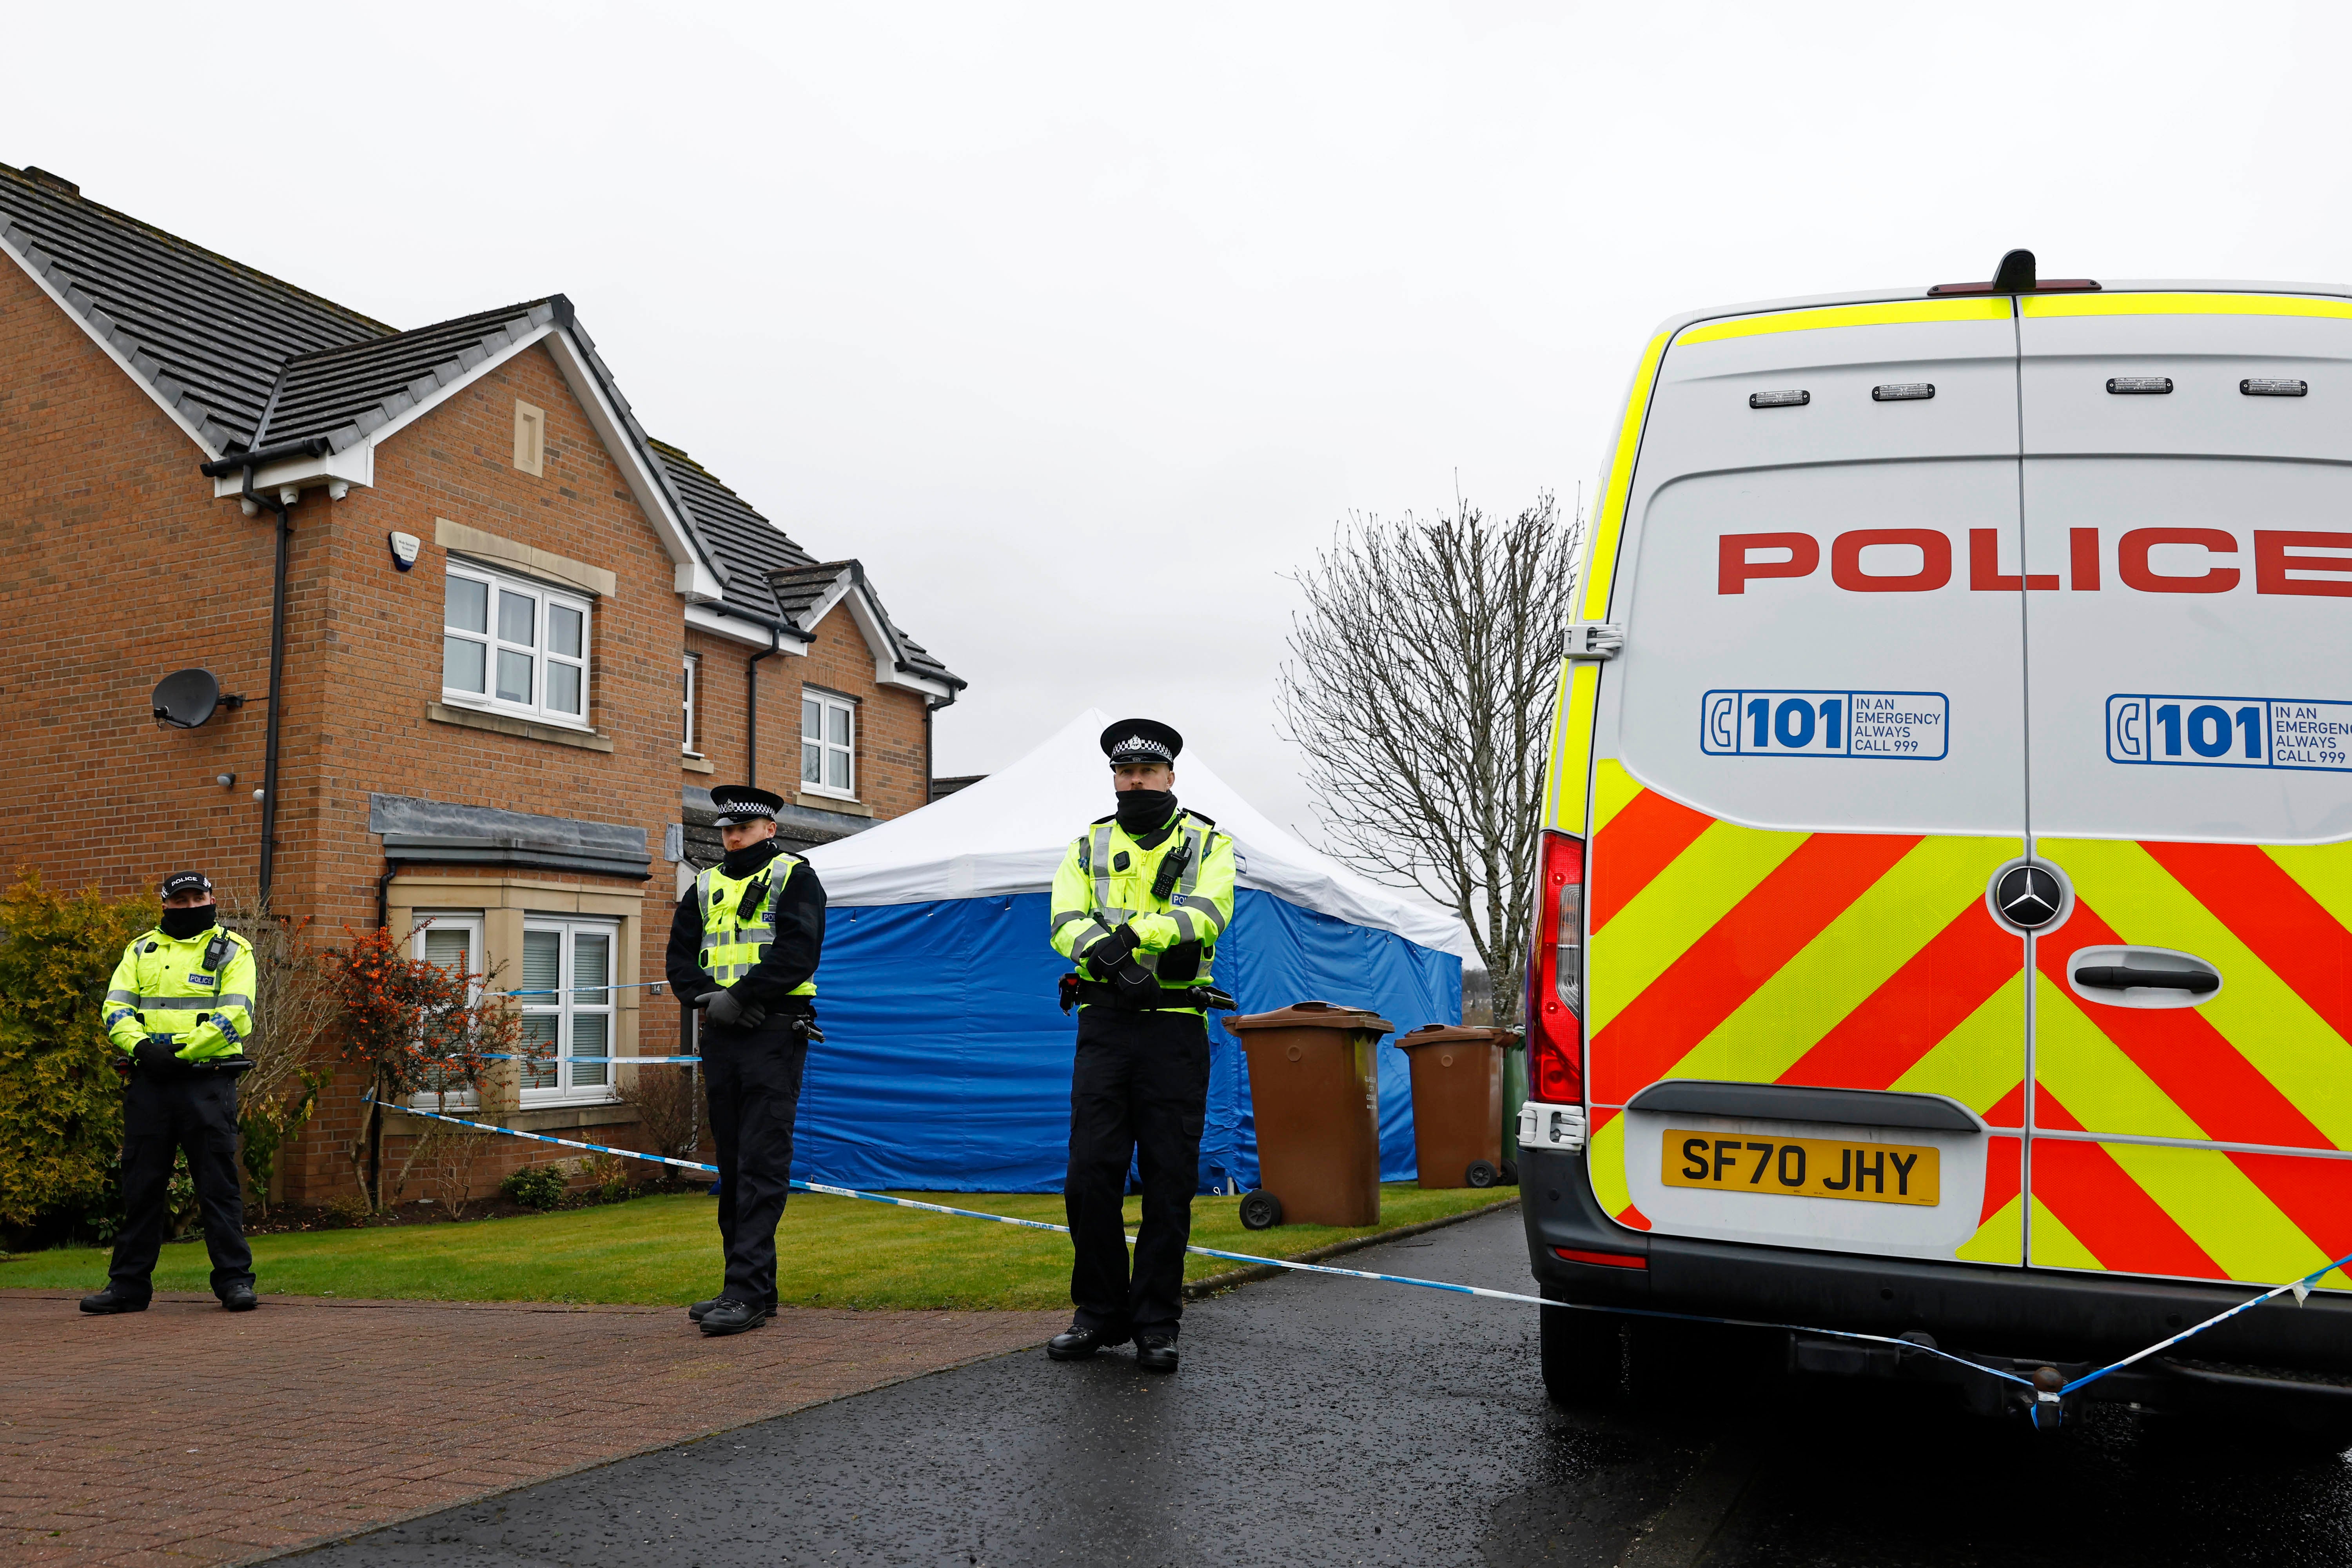 Police outside Nicola Sturgeon and Peter Murrell’s property earlier this week